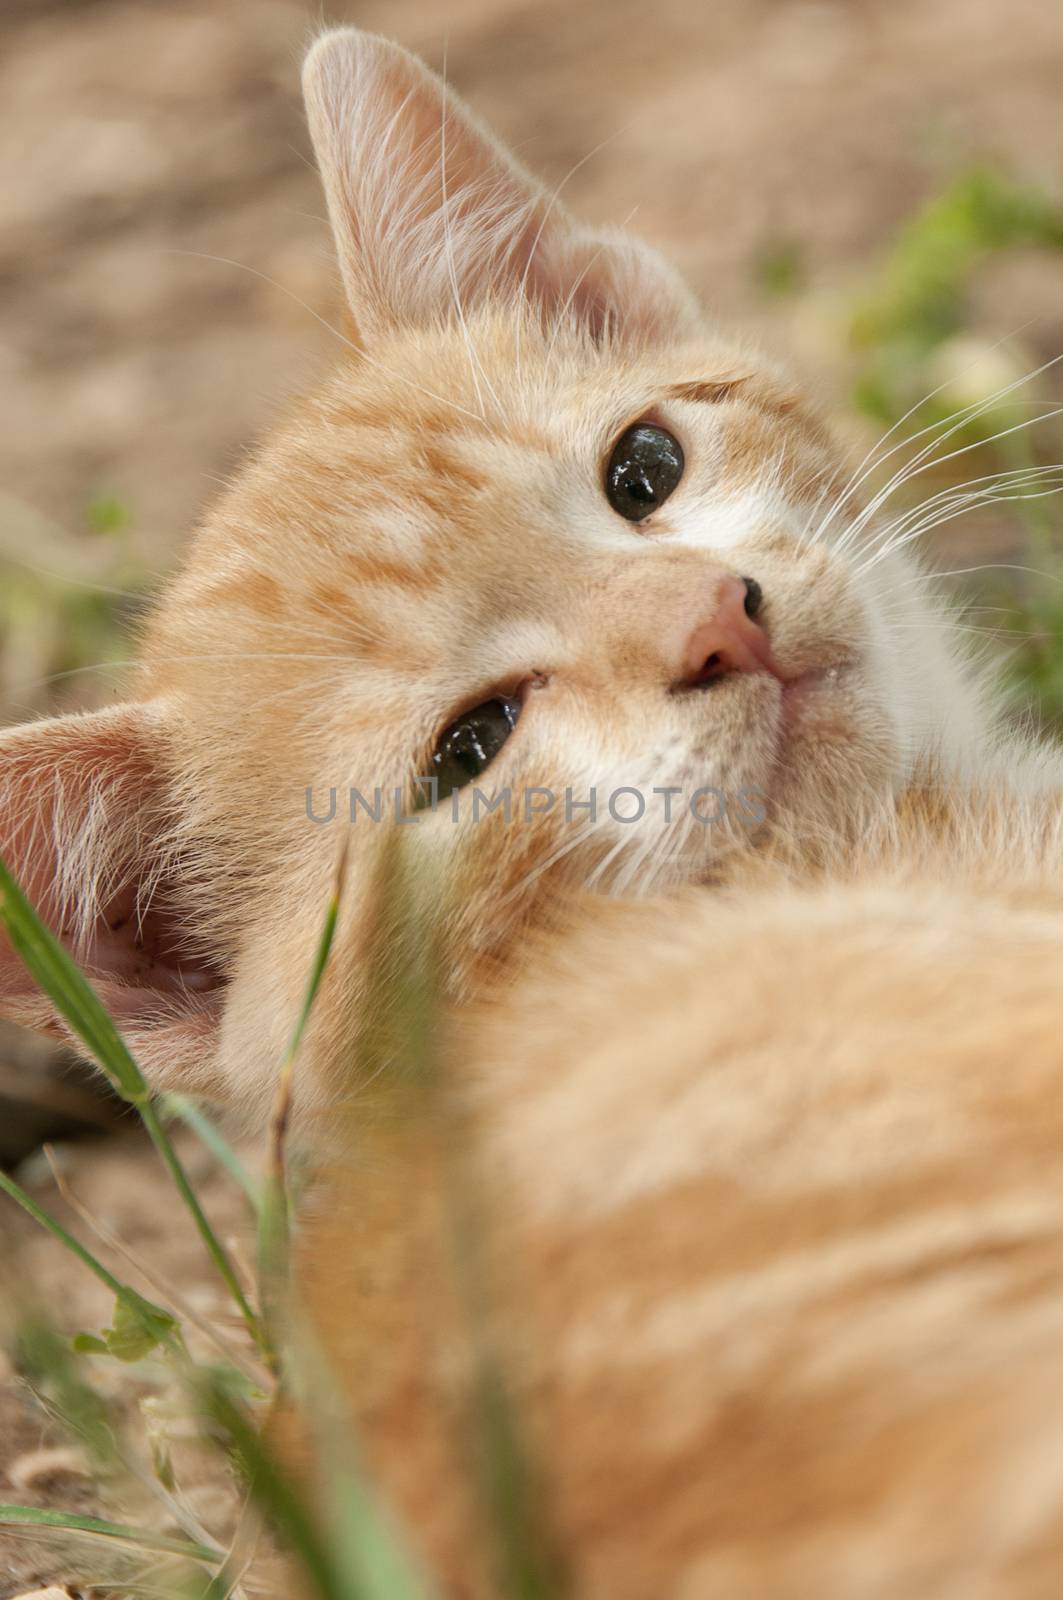 Puppy cat resting in the garden by jalonsohu@gmail.com